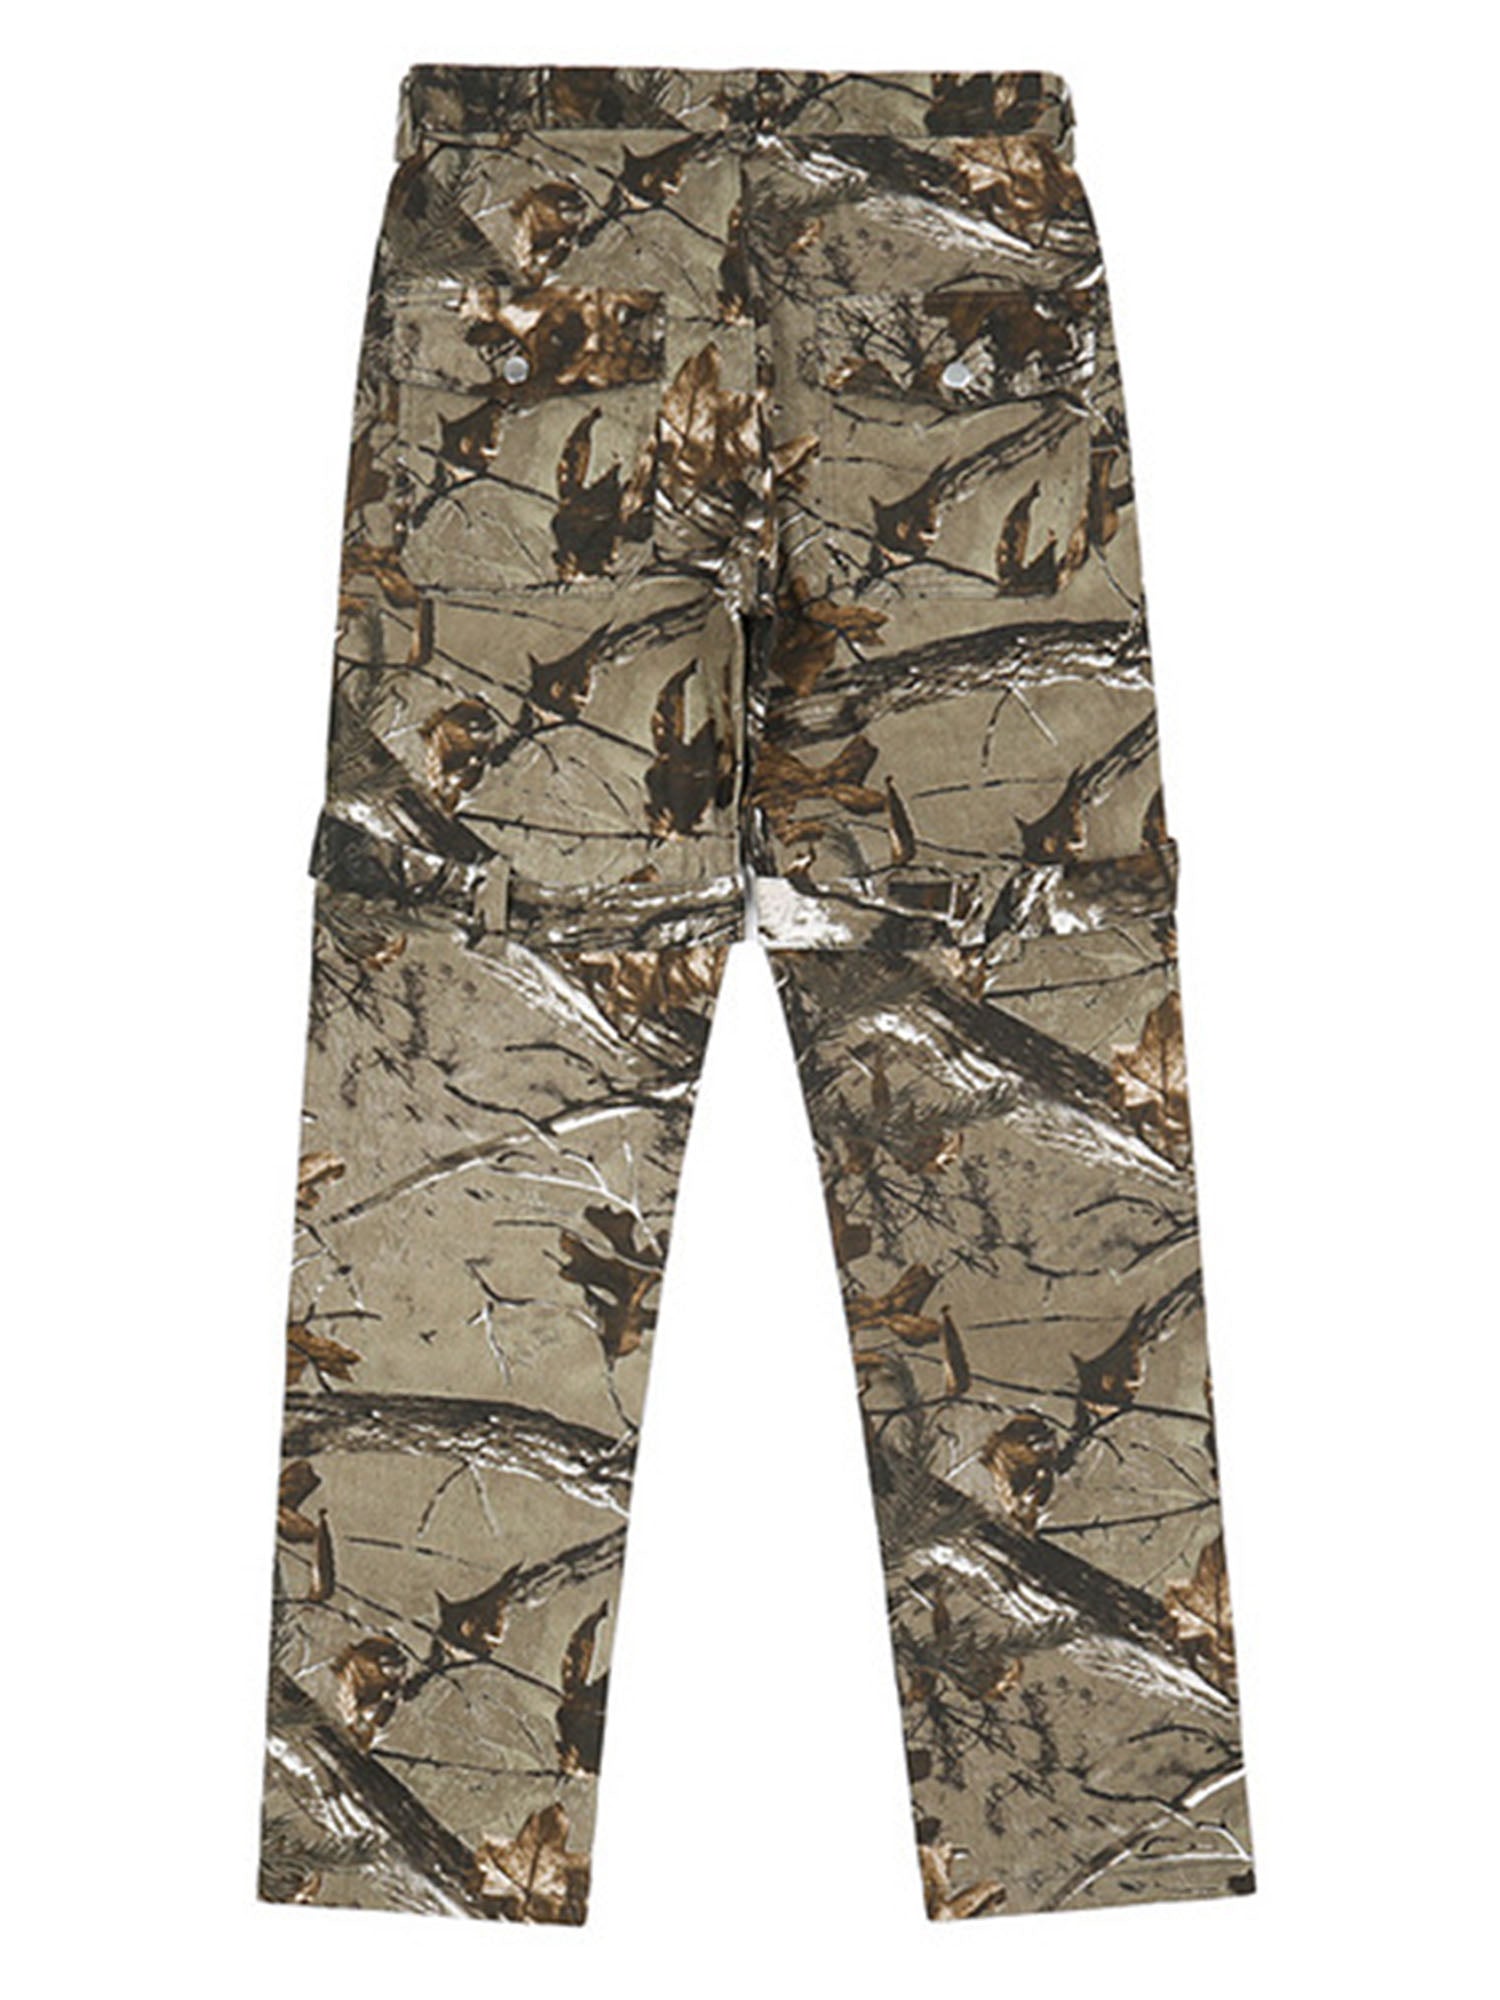 Justnotag Camo Print Braid Schnalle Normale Hose